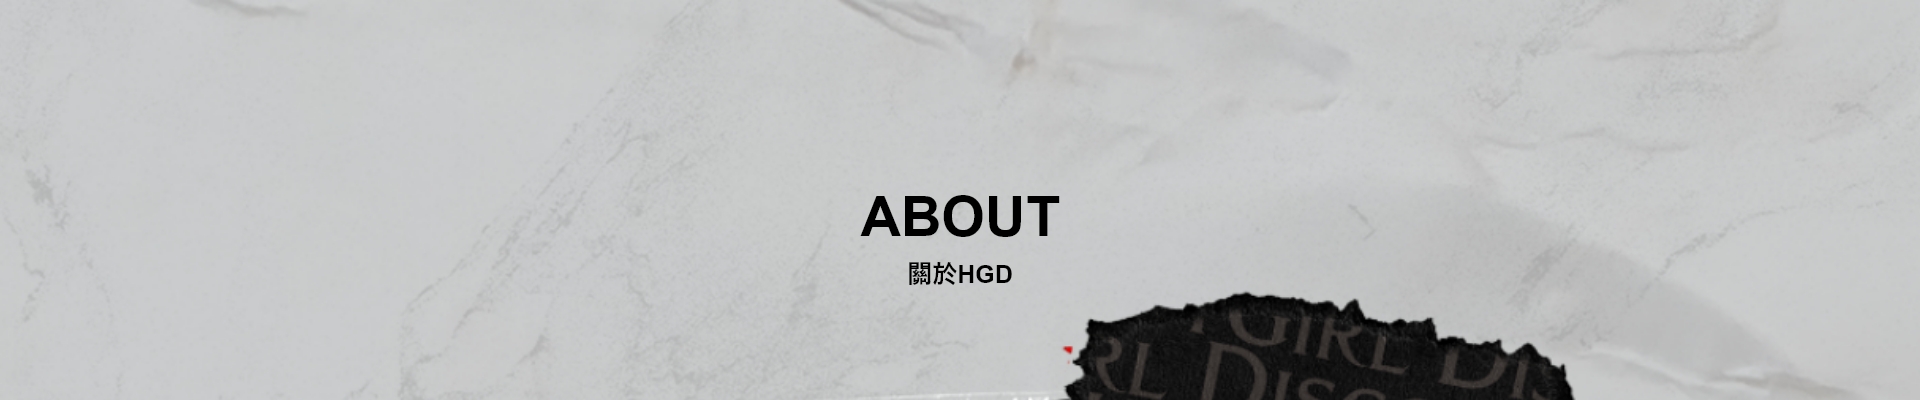 about HGD